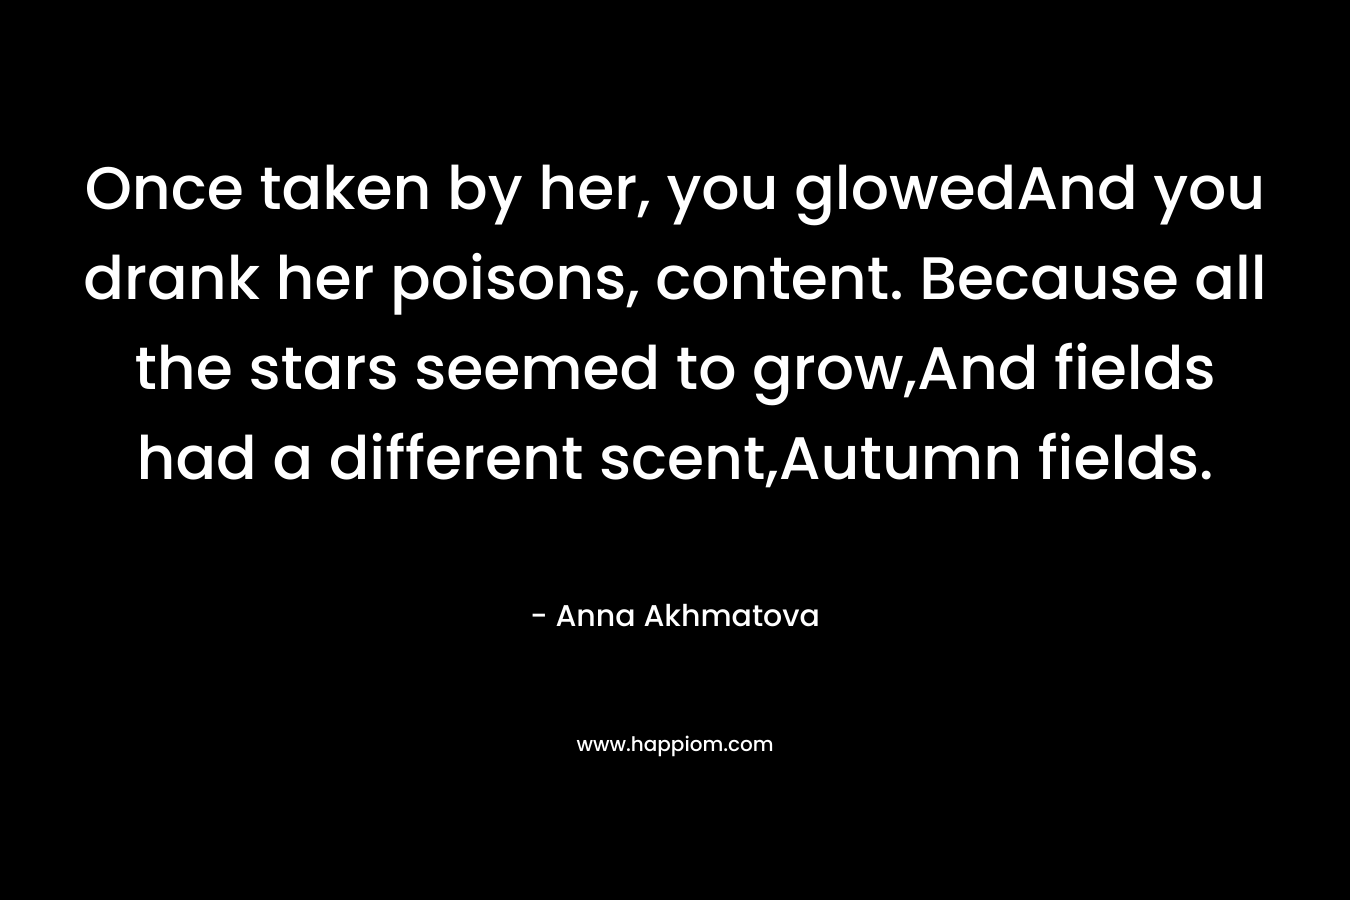 Once taken by her, you glowedAnd you drank her poisons, content. Because all the stars seemed to grow,And fields had a different scent,Autumn fields.